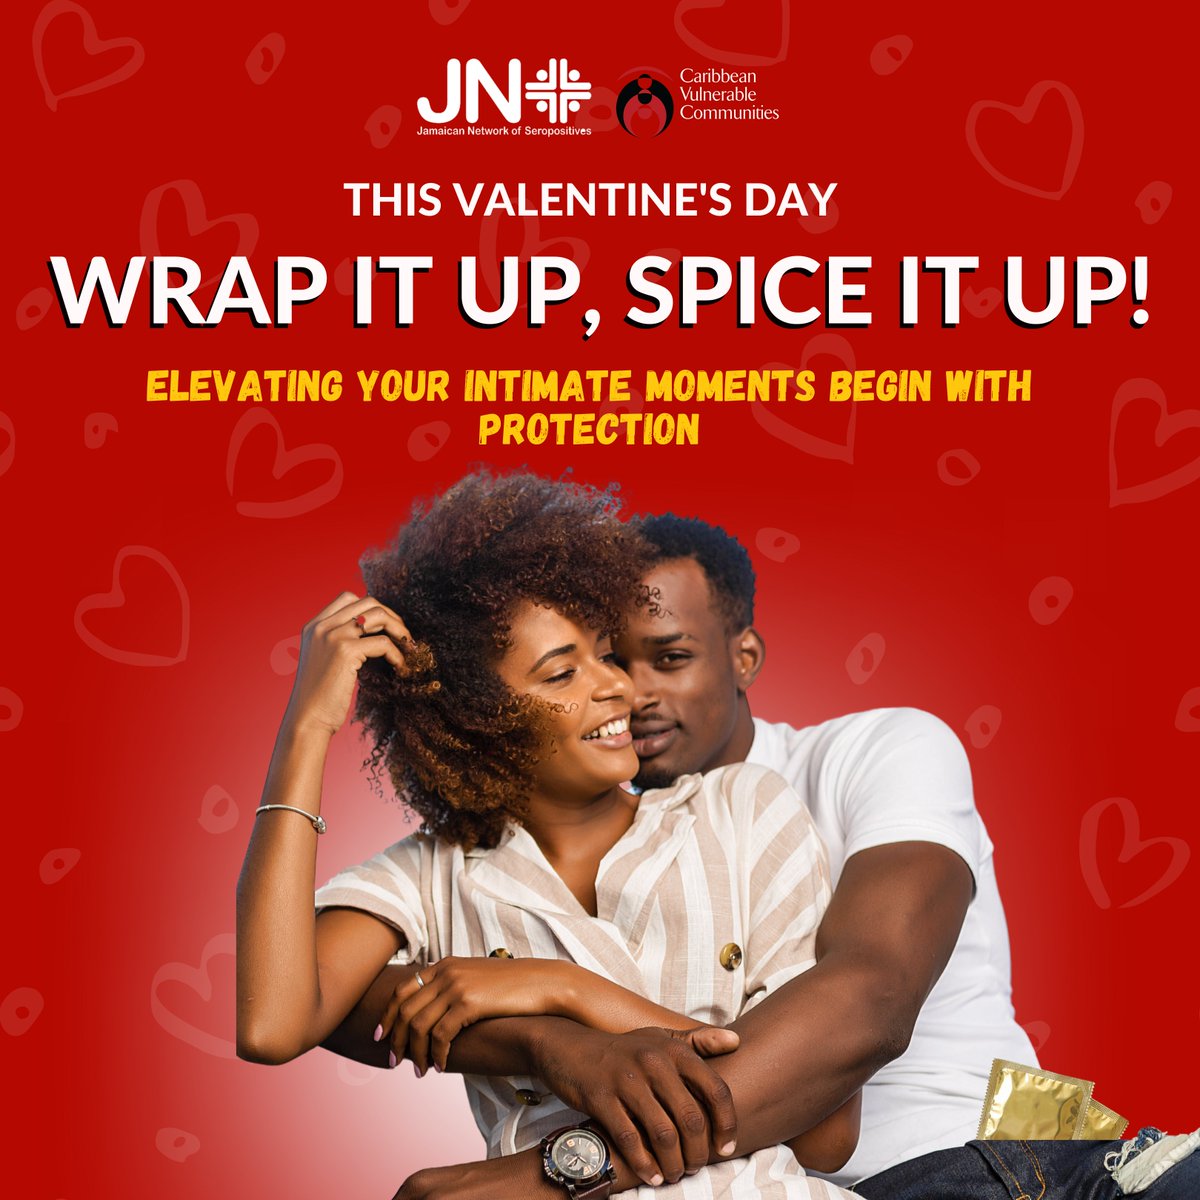 Unwrap love responsibly this Valentine’s Day with a little wrap-up action. #valentinesday2024
.
#safersexweek #safersexweek2024 #safersexweek #safersex #safesex #cvc #myjnplus